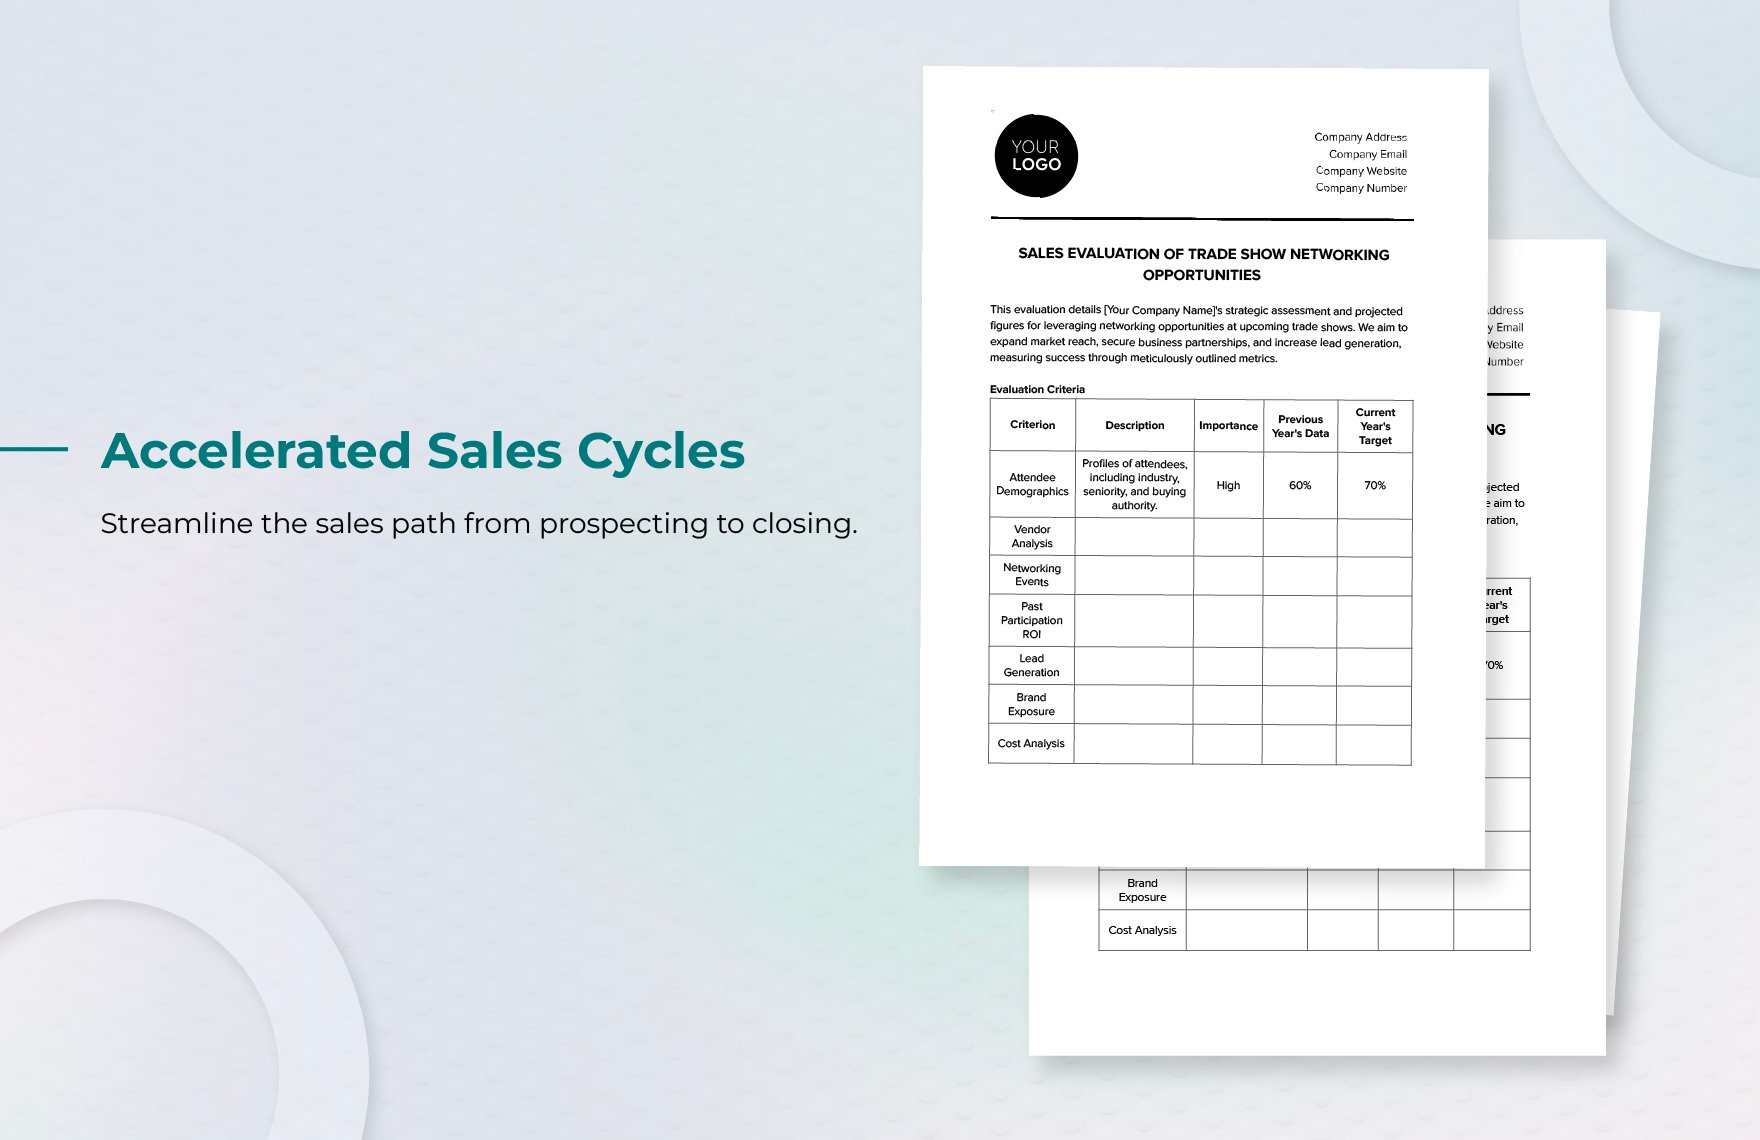 Sales Evaluation of Trade Show Networking Opportunities Template